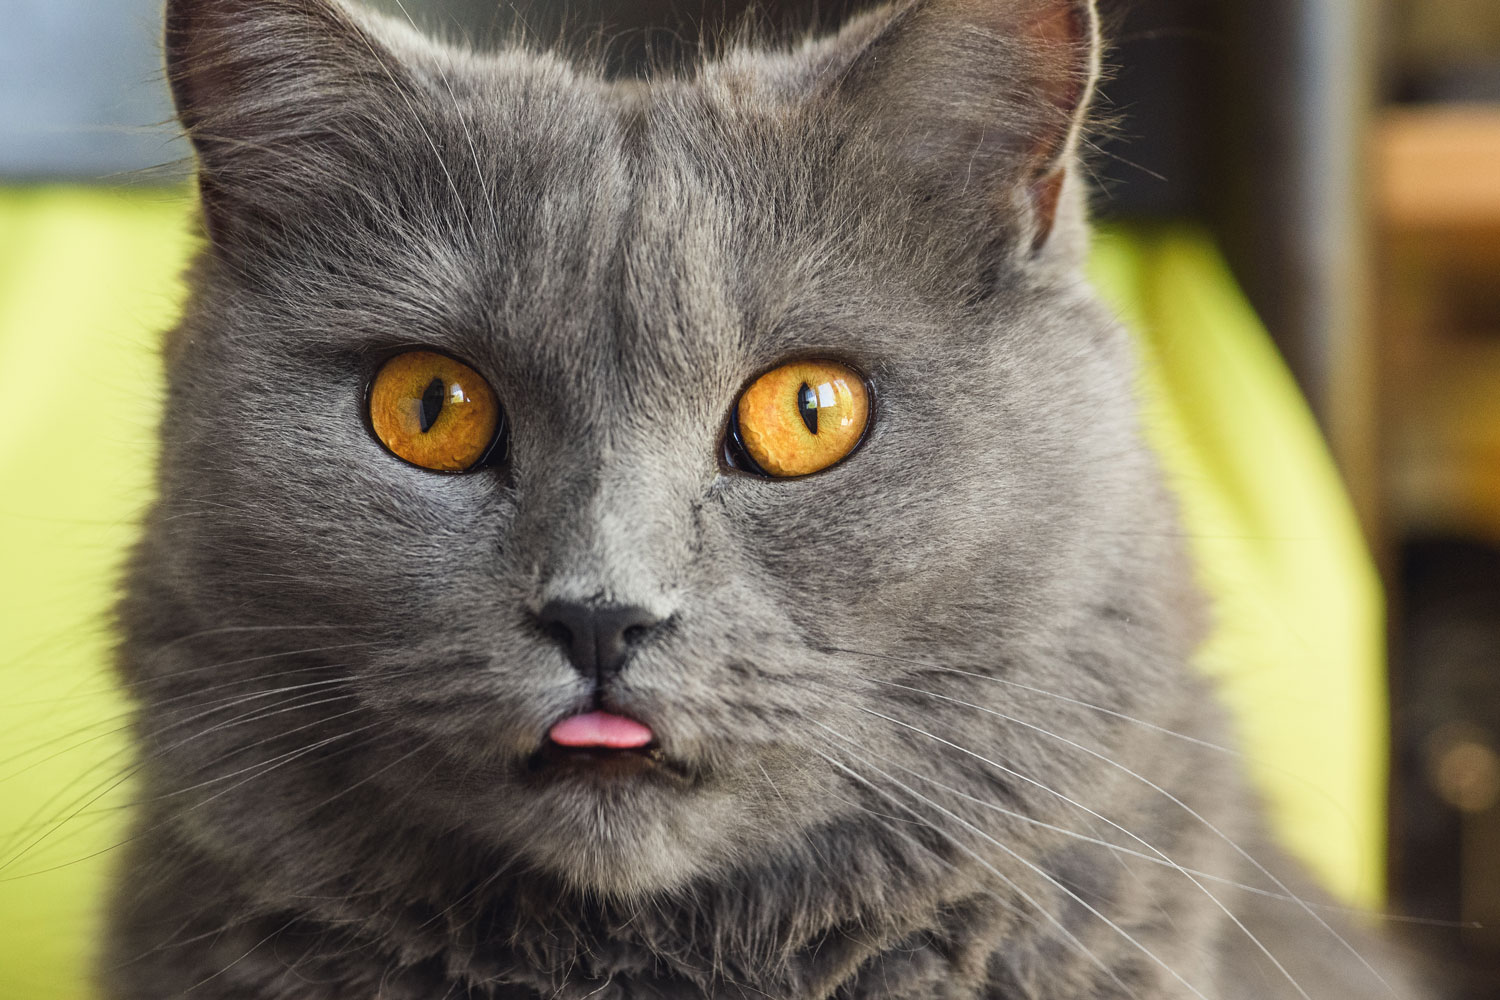 Cat Sticking Their Tongue Out Here’s Why! TheCatSite Articles